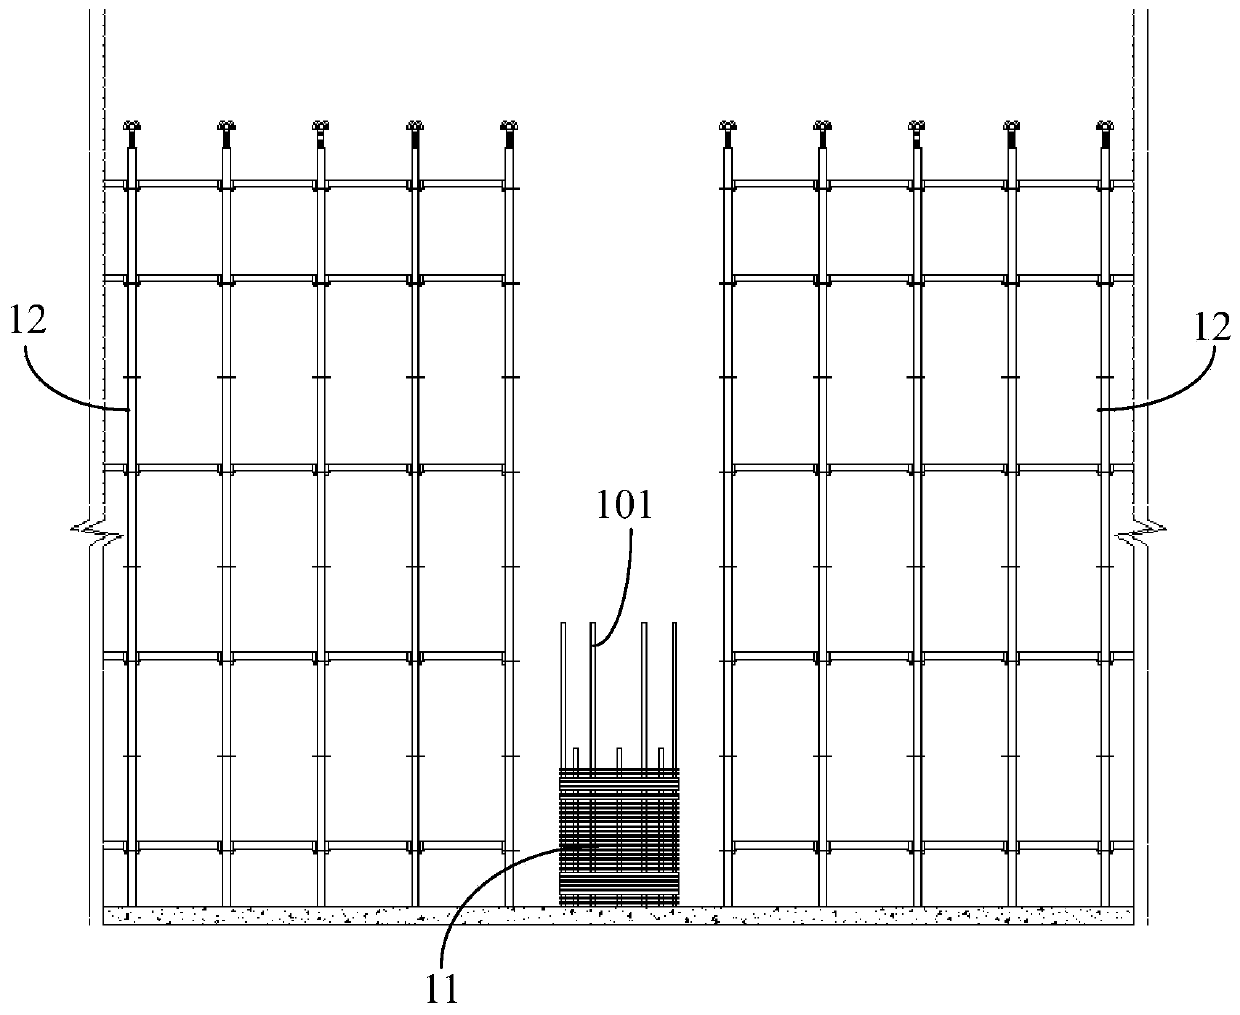 A construction method for horizontal prefabricated components of prefabricated concrete structures